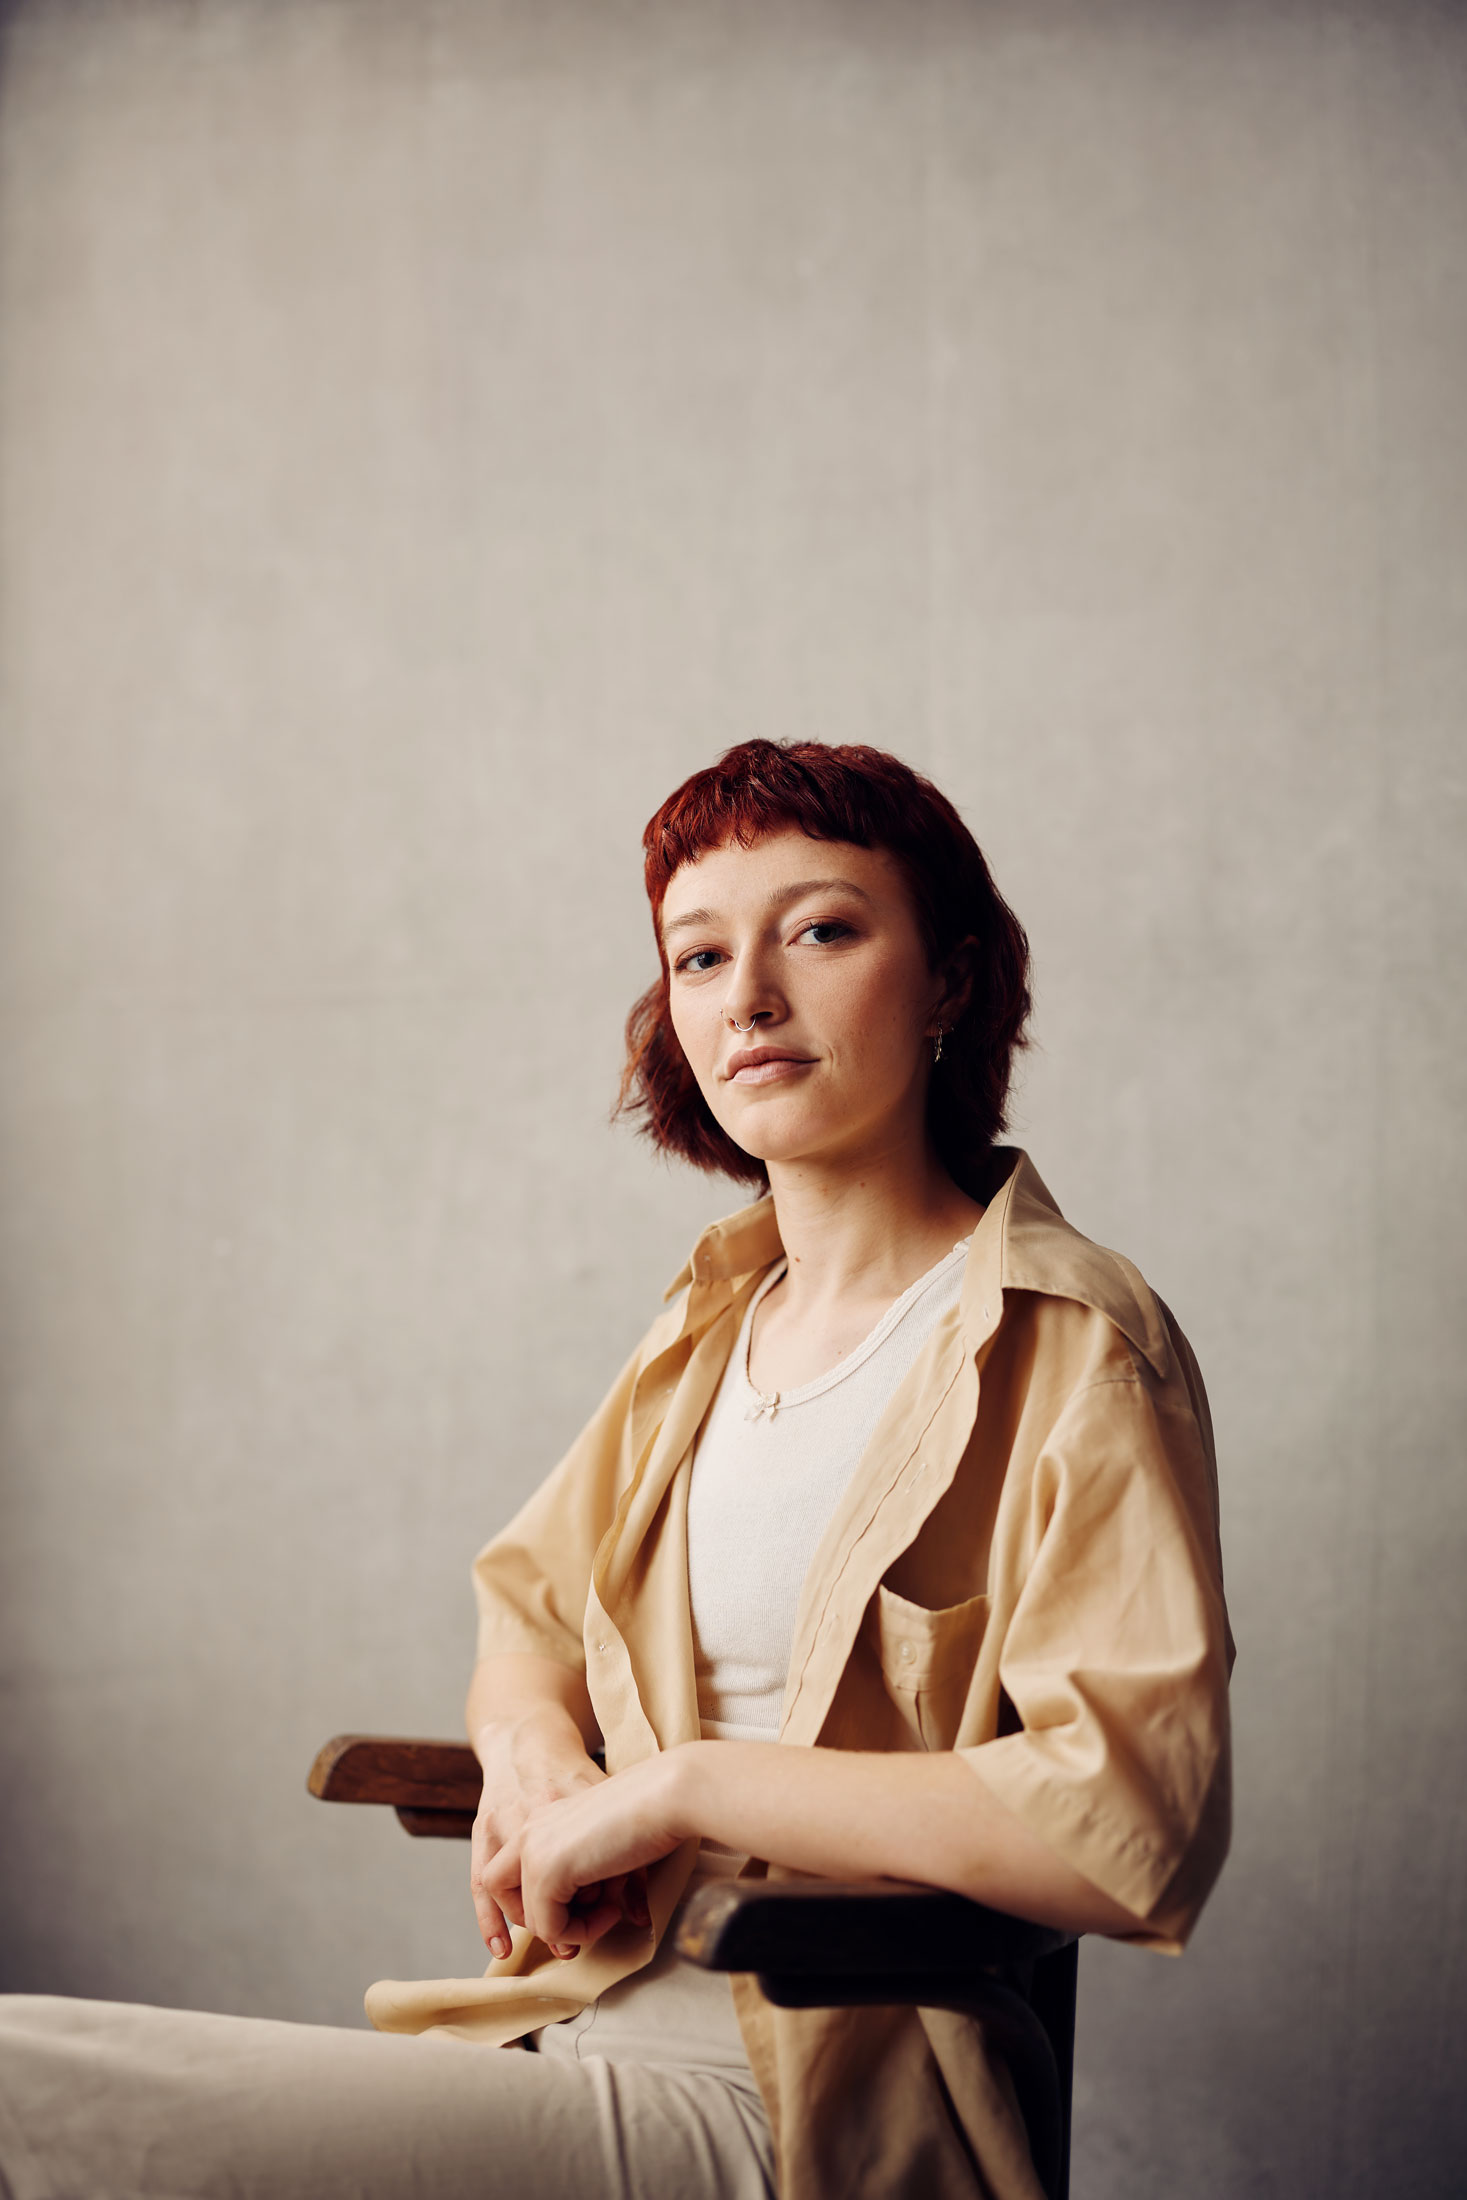 Holly leans back resting their arms on the arms of a chair. They have a short red bob, with a trim fringe. Their pale yellow button up reveals a white top.